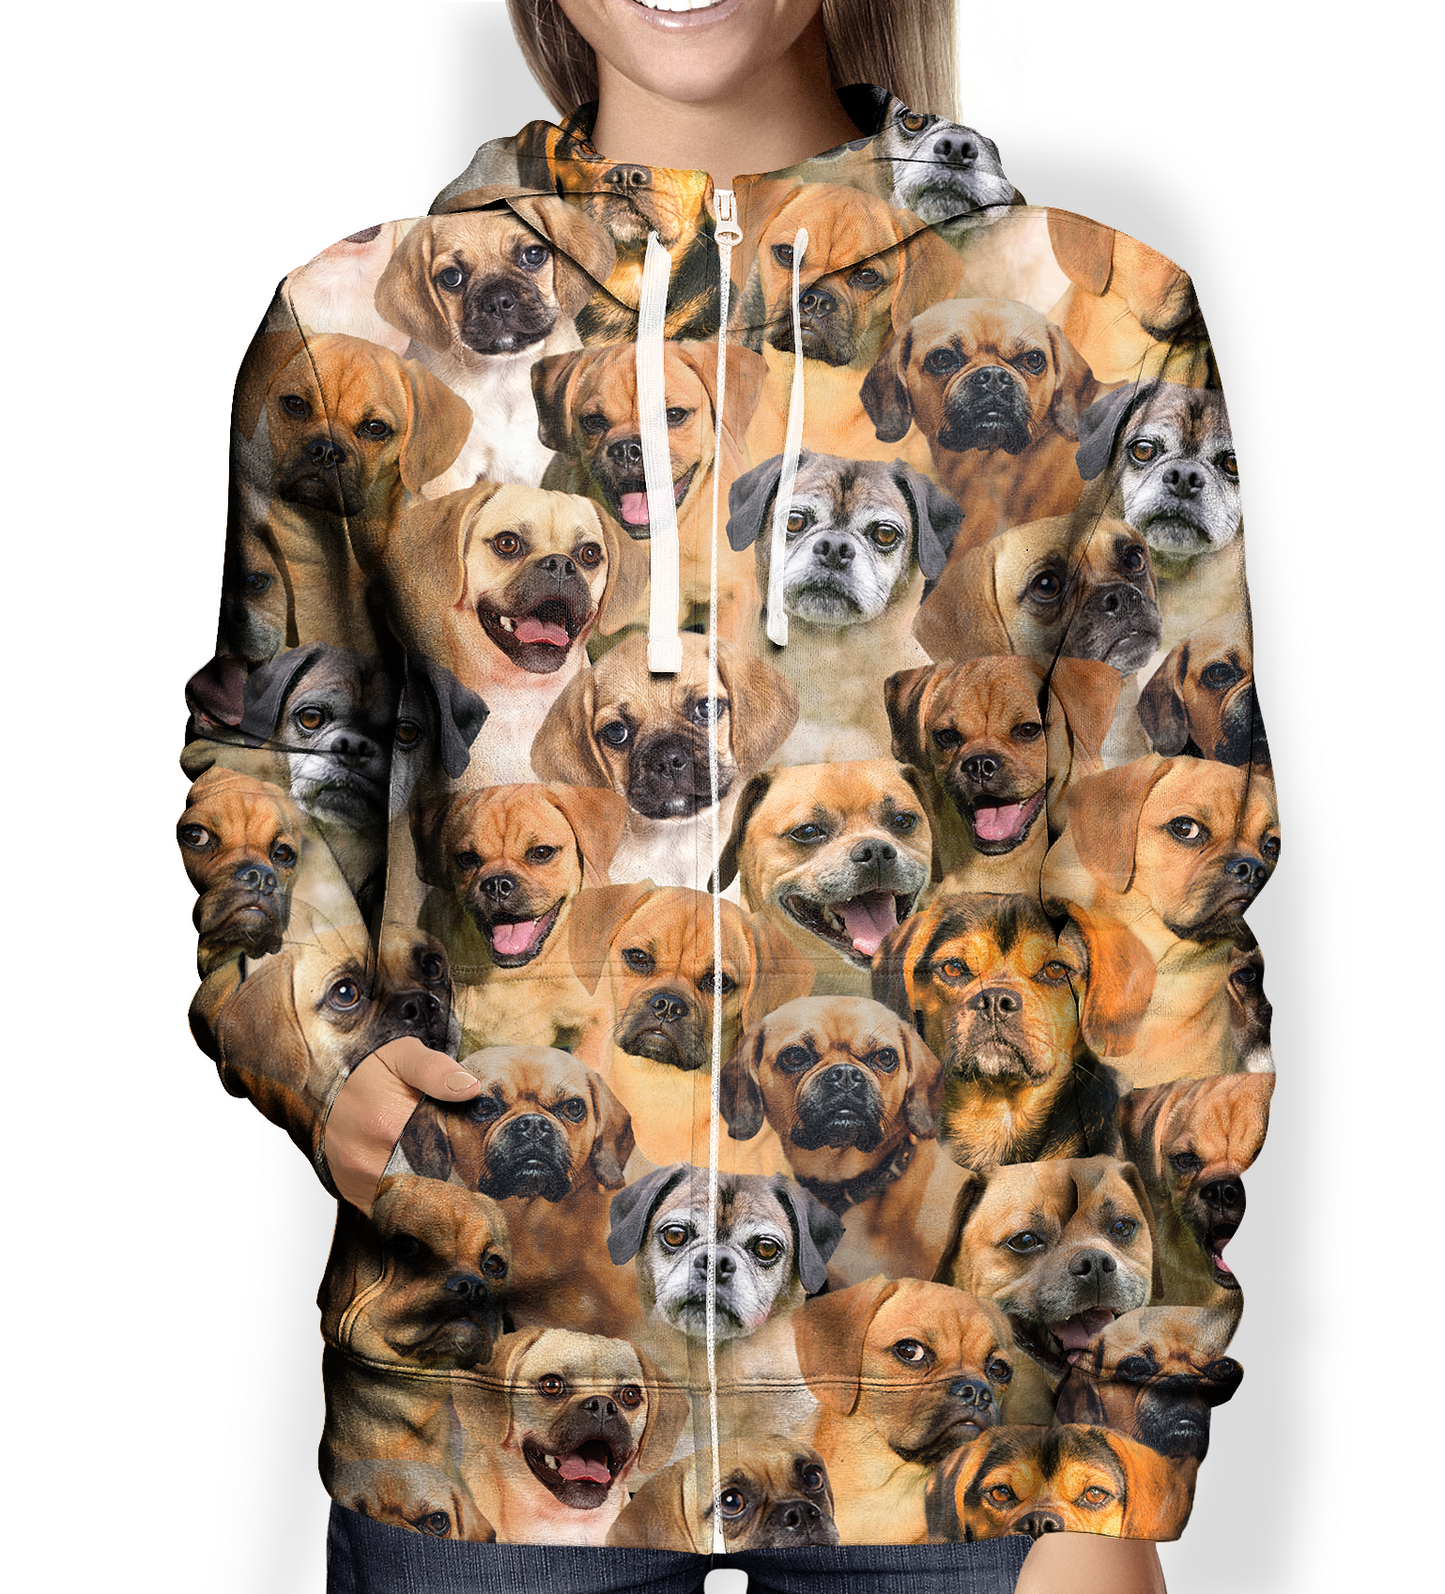 You Will Have A Bunch Of Puggles - Hoodie V1